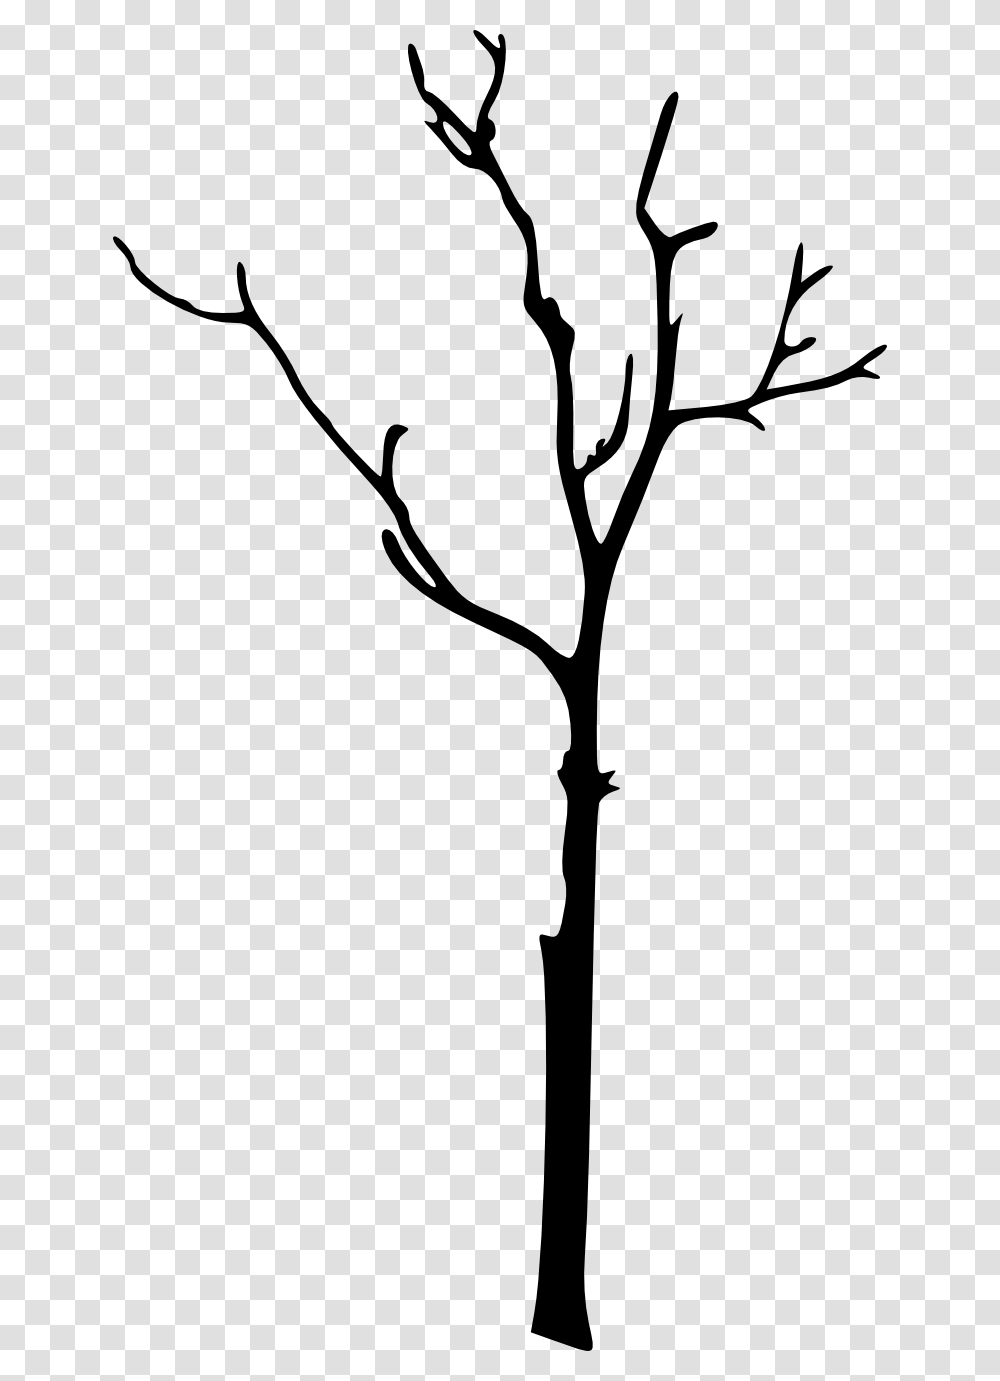 Silhouette Twig Clip Art Silhouette Tree Branch Clipart, Plant, Flower, Blossom, Stencil Transparent Png